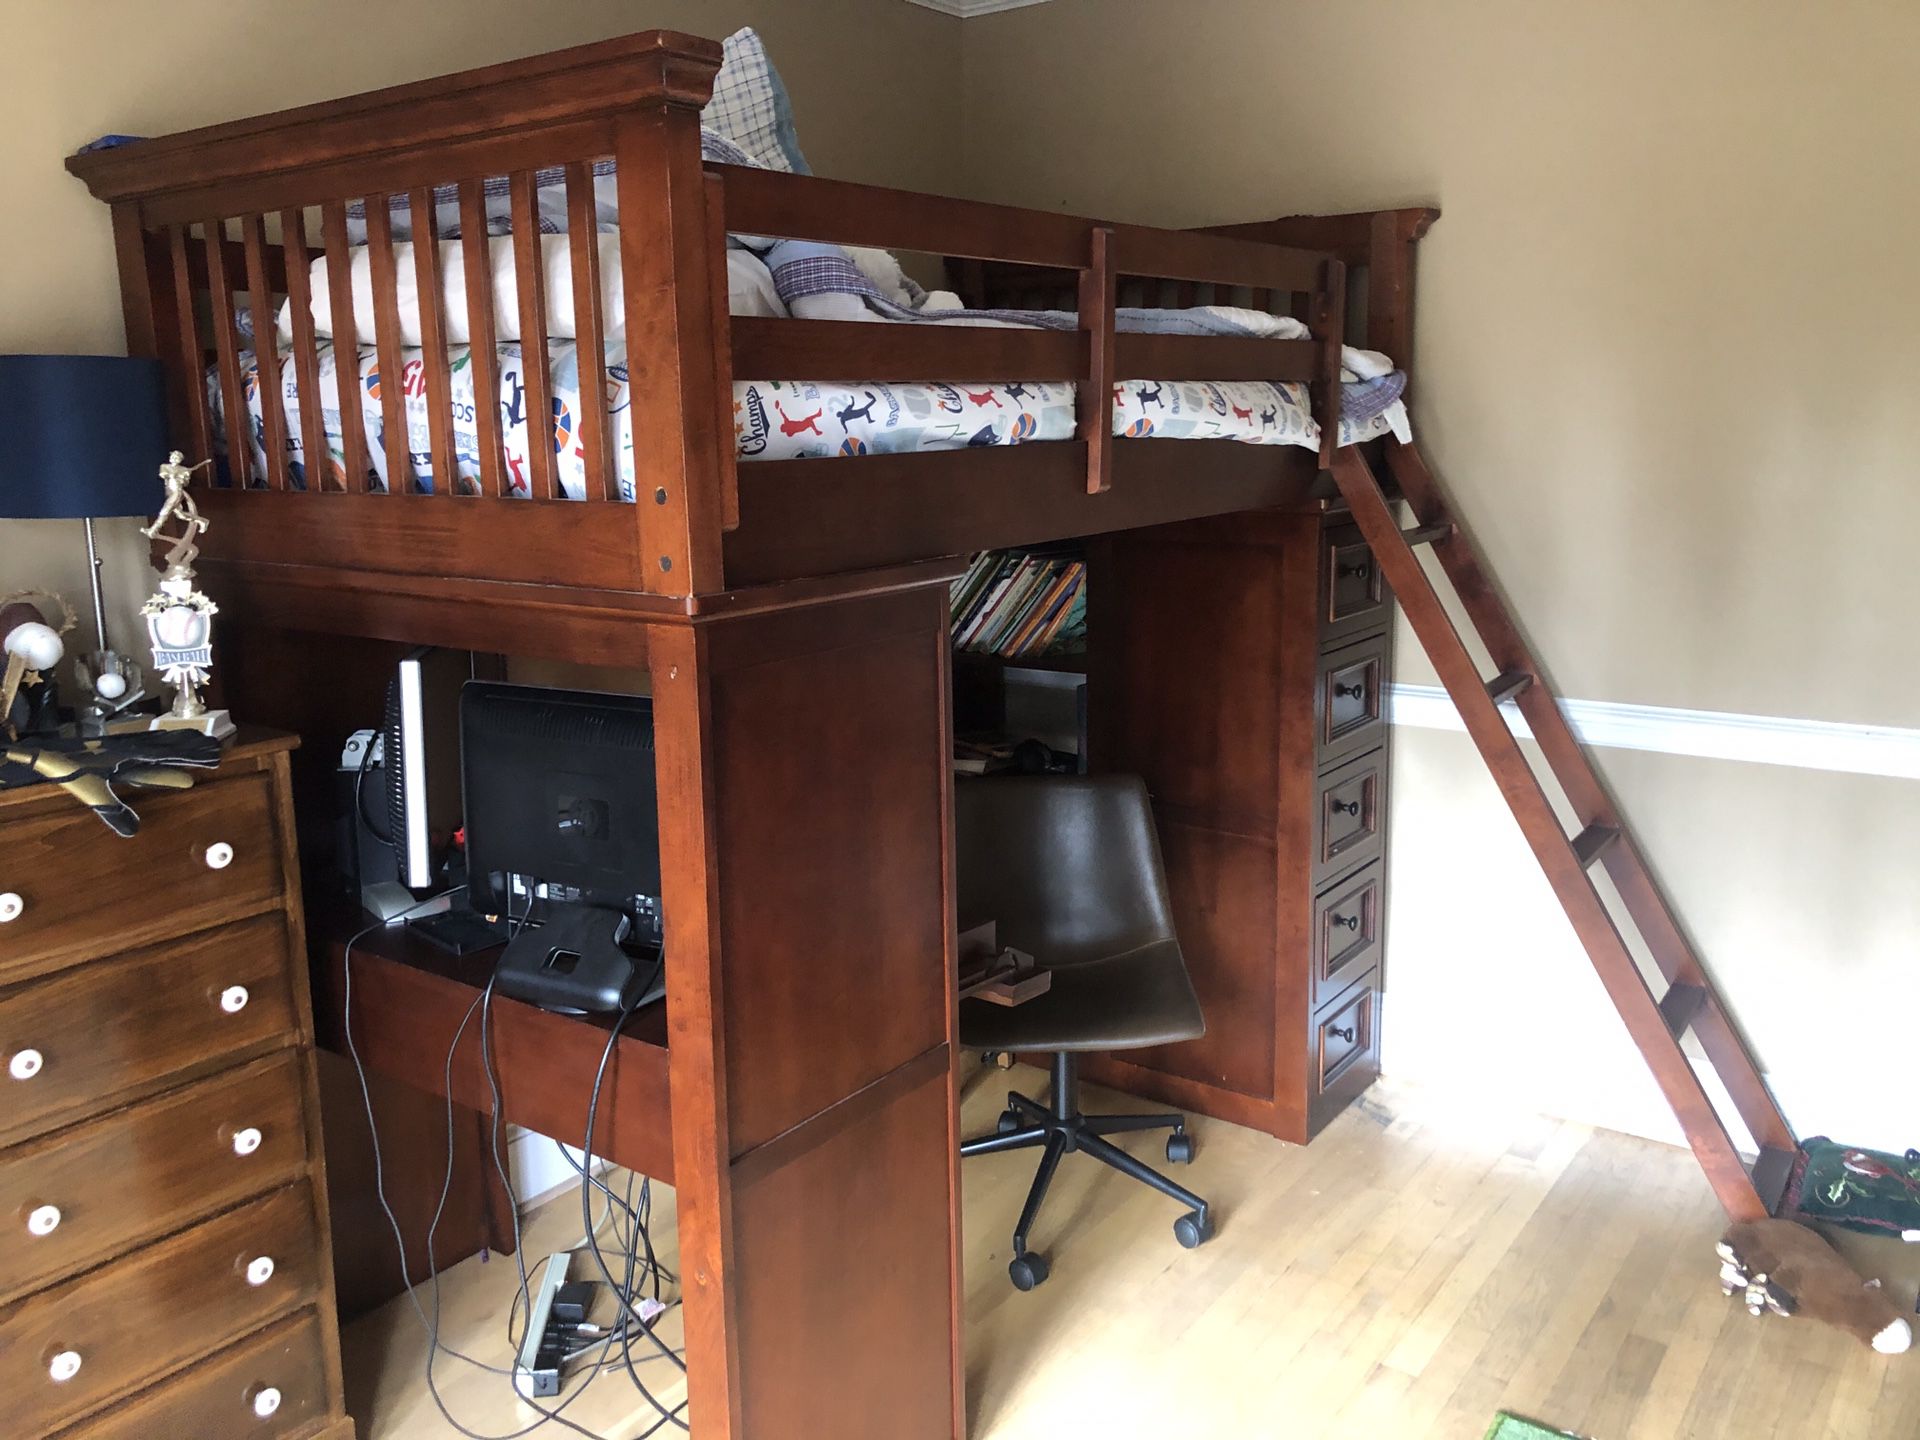 Loft Bed Twin with Bookshelves, Drawers and Computer Desk